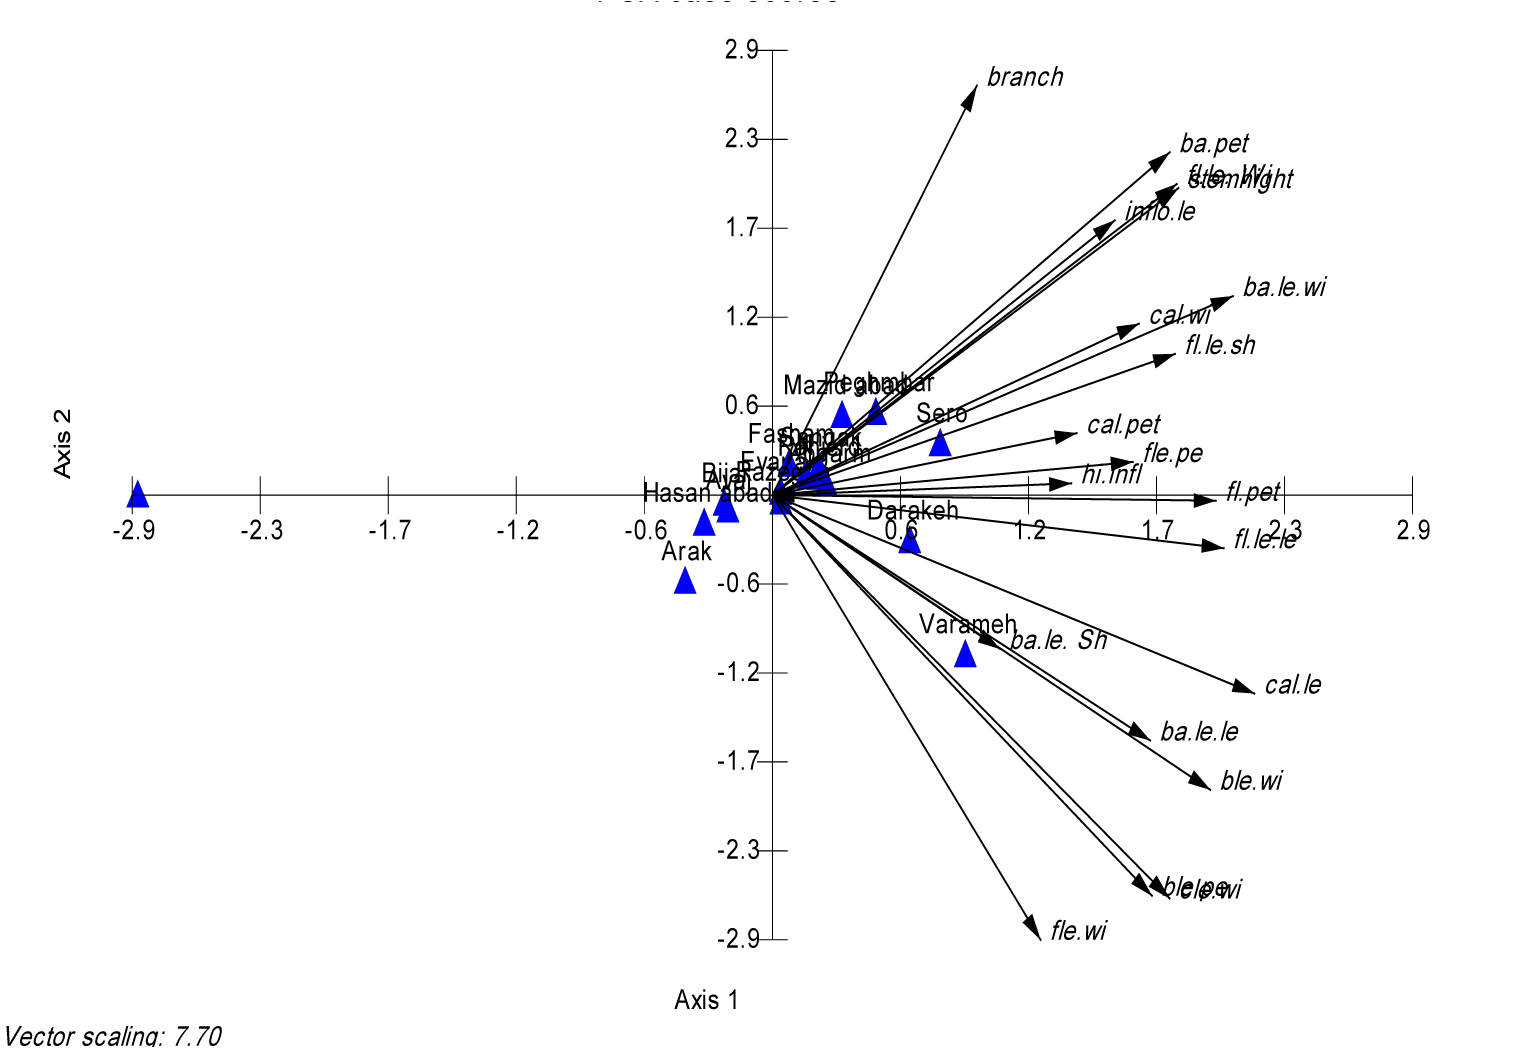 Fig. 1. PCA biplot of the studied populations with their morphological characteristics. Abbreviations: branch – branch number; ba.pet – basal leaf petiole; ba.le.sh – basal leaf shape; ba.le.le. – basal leaf length; ba.le.wi – basal leaf length/wide ratio; fle.wi – floral leaf width; fl.le.le – floral leaf length; fl.le.sh – floral leaf shape; fl.pet – floral leaf petiole; info le. – inflorescence length; cal. wi. – calyx width; cal.pet – calyx petiole; cal. le – calyx length.